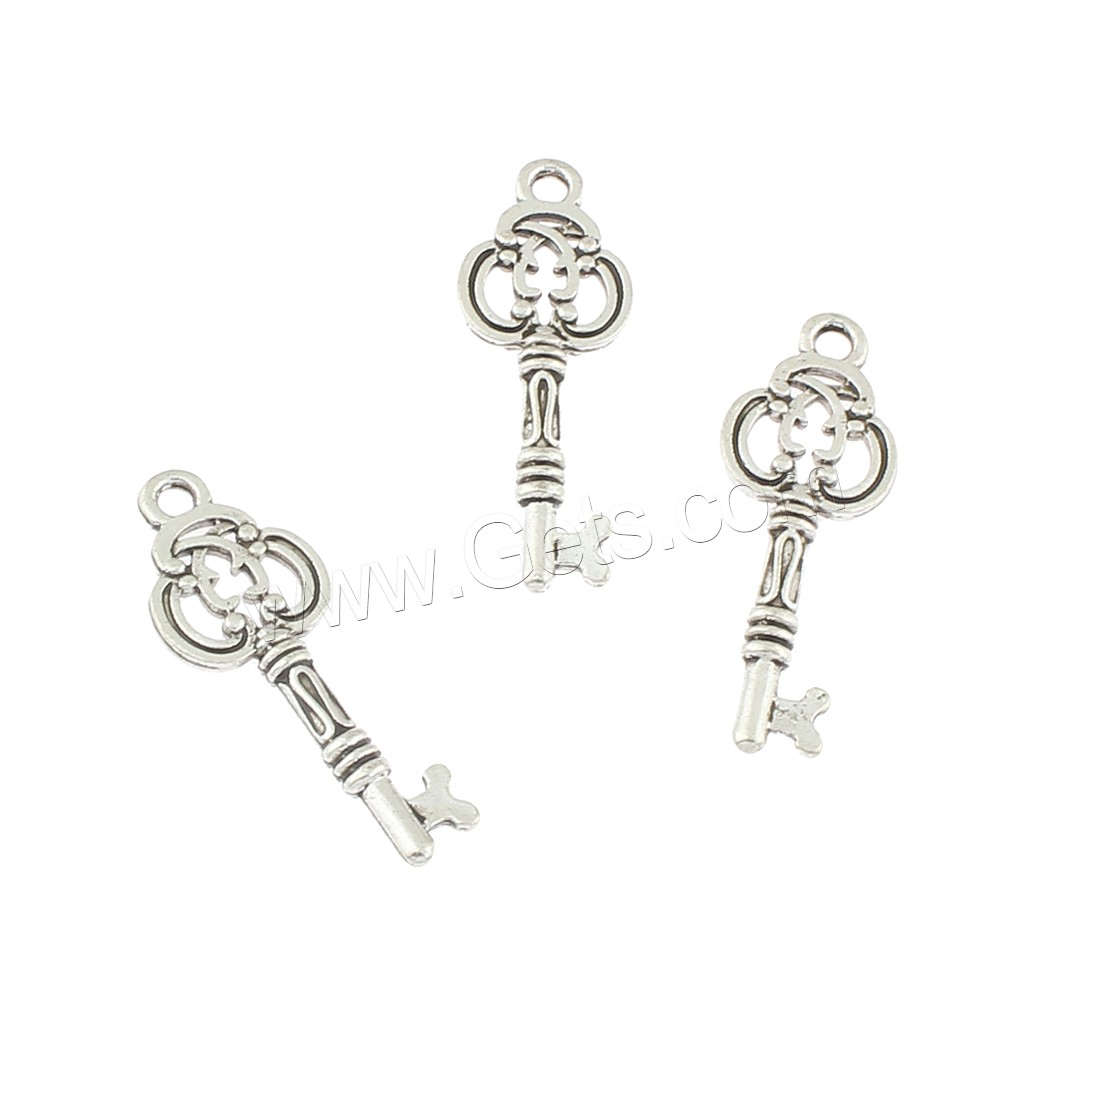 Zinc Alloy Jewelry Pendants, Key, antique silver color plated, 10x27x3mm, Hole:Approx 2mm, Approx 500PCs/Bag, Sold By Bag